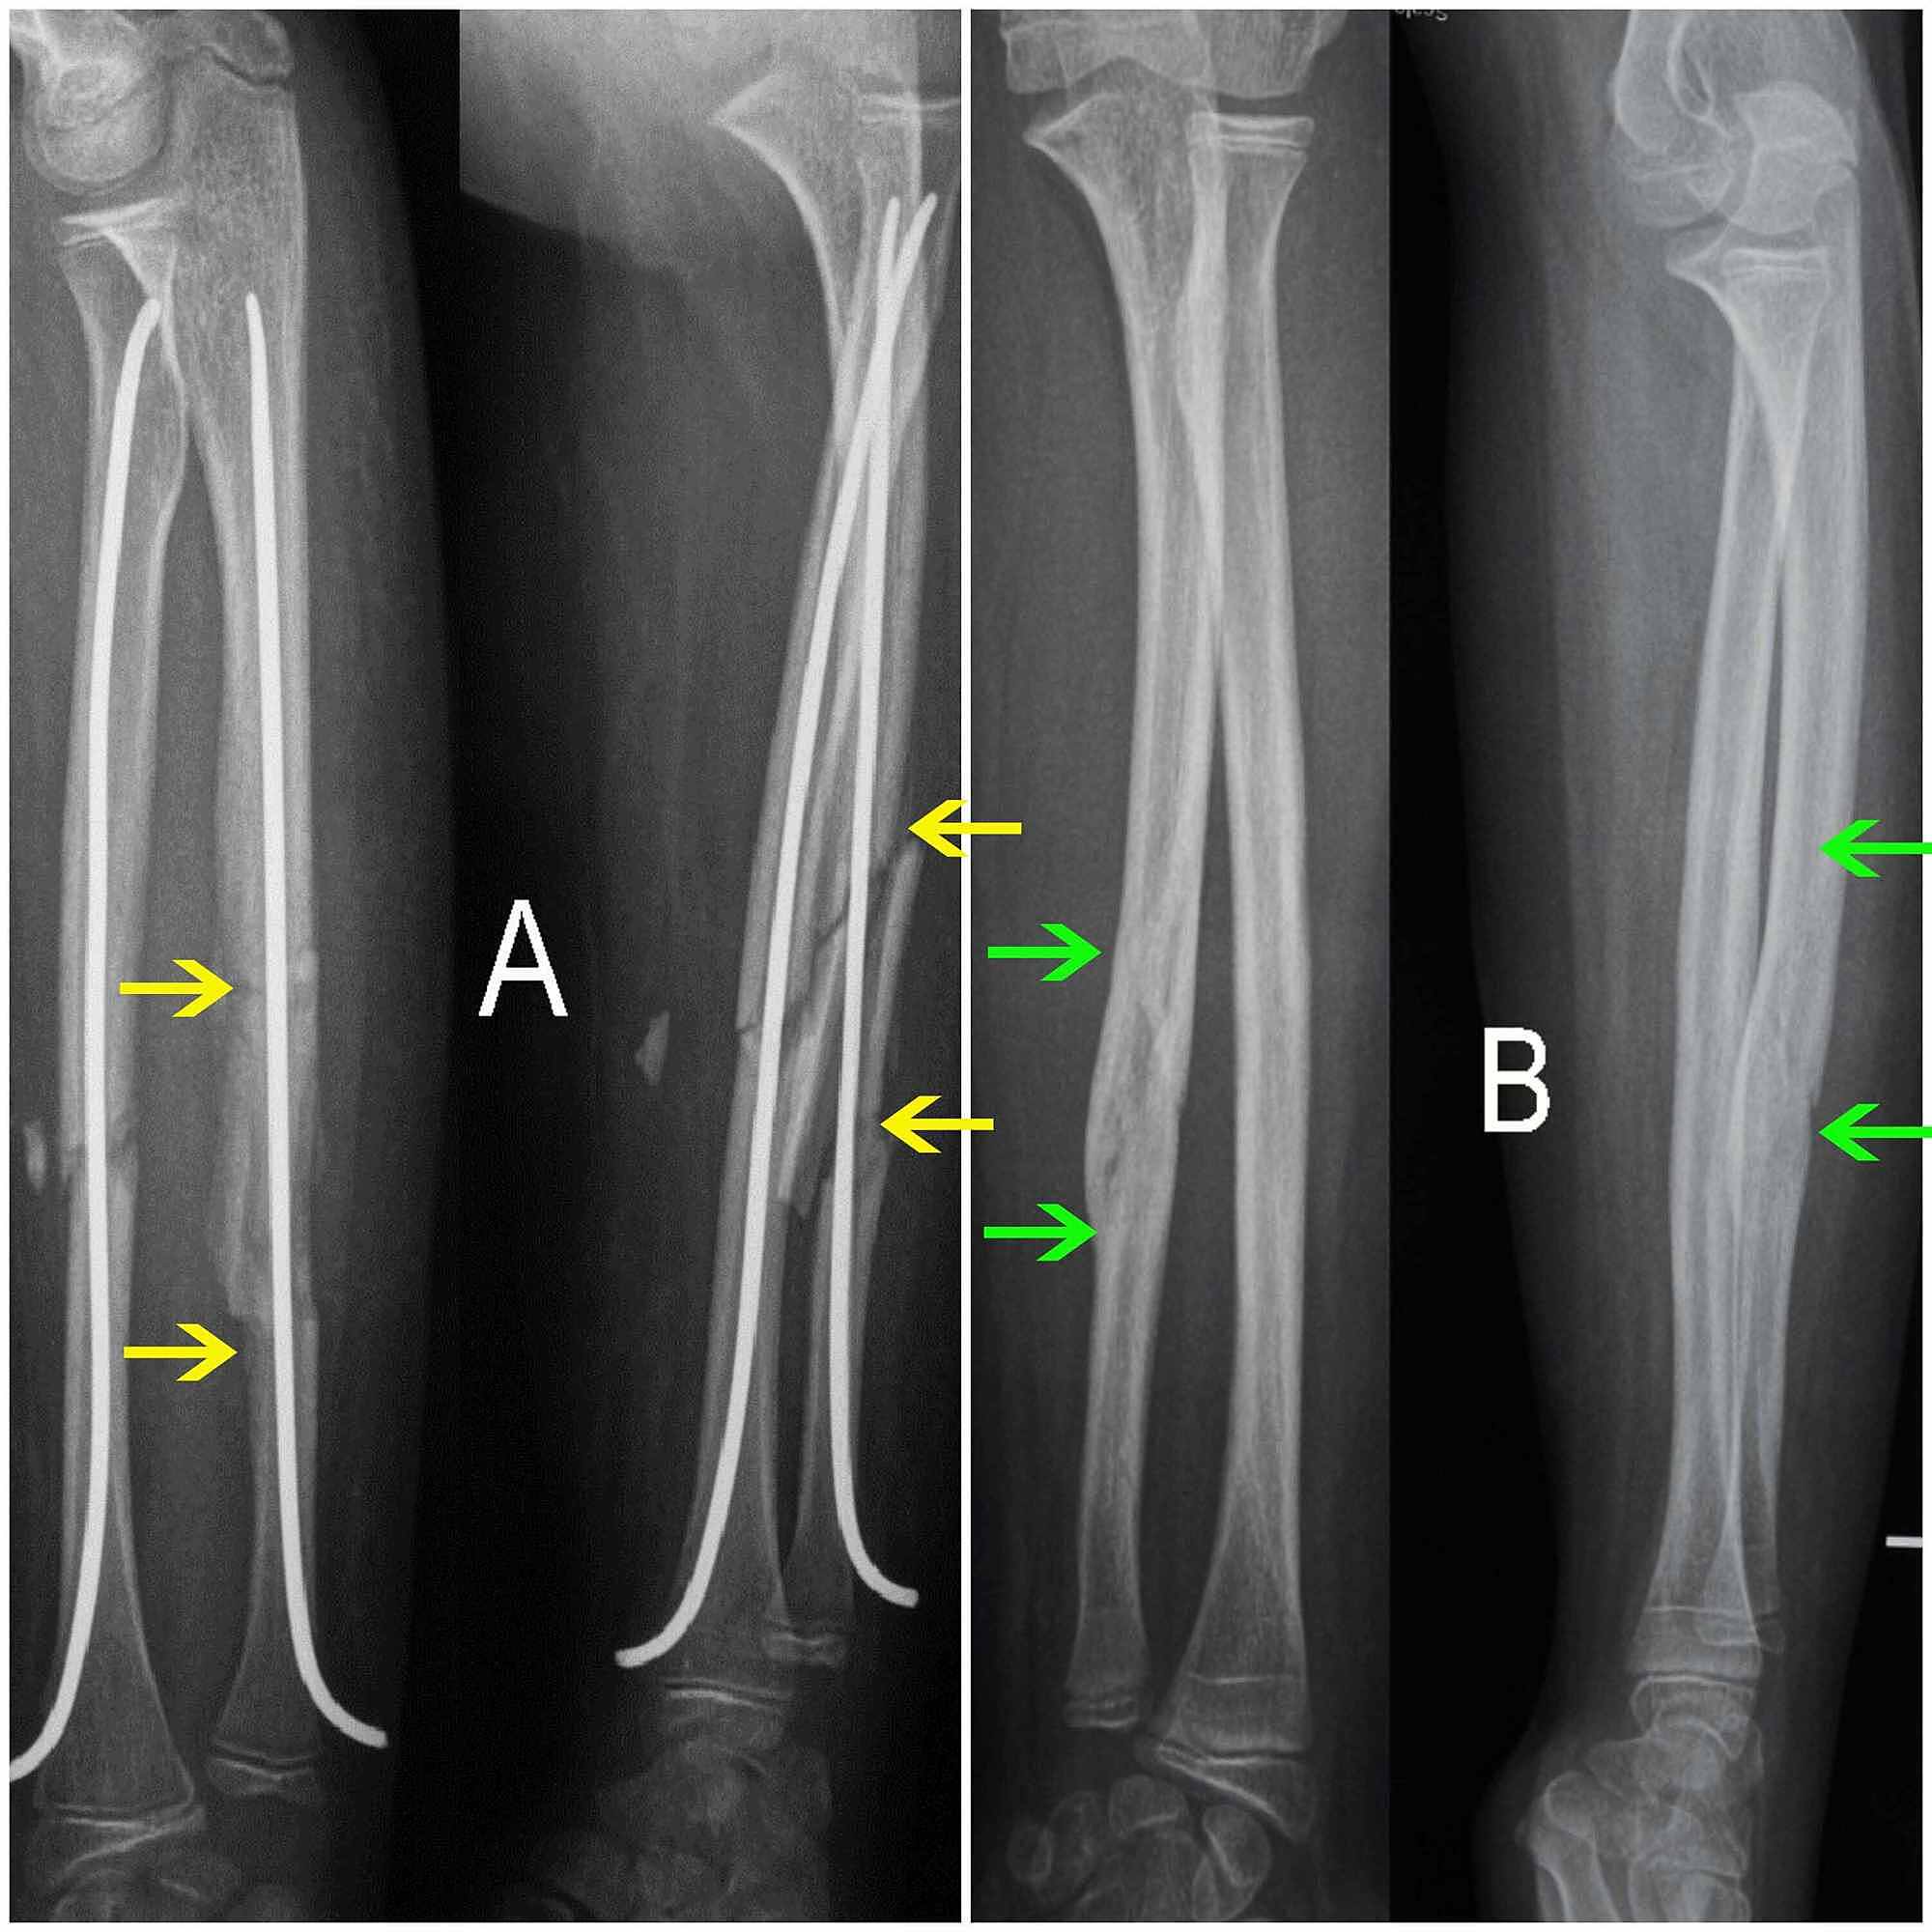 Cureus Retrograde Fixation Of The Ulna In Pediatric Forearm Fractures